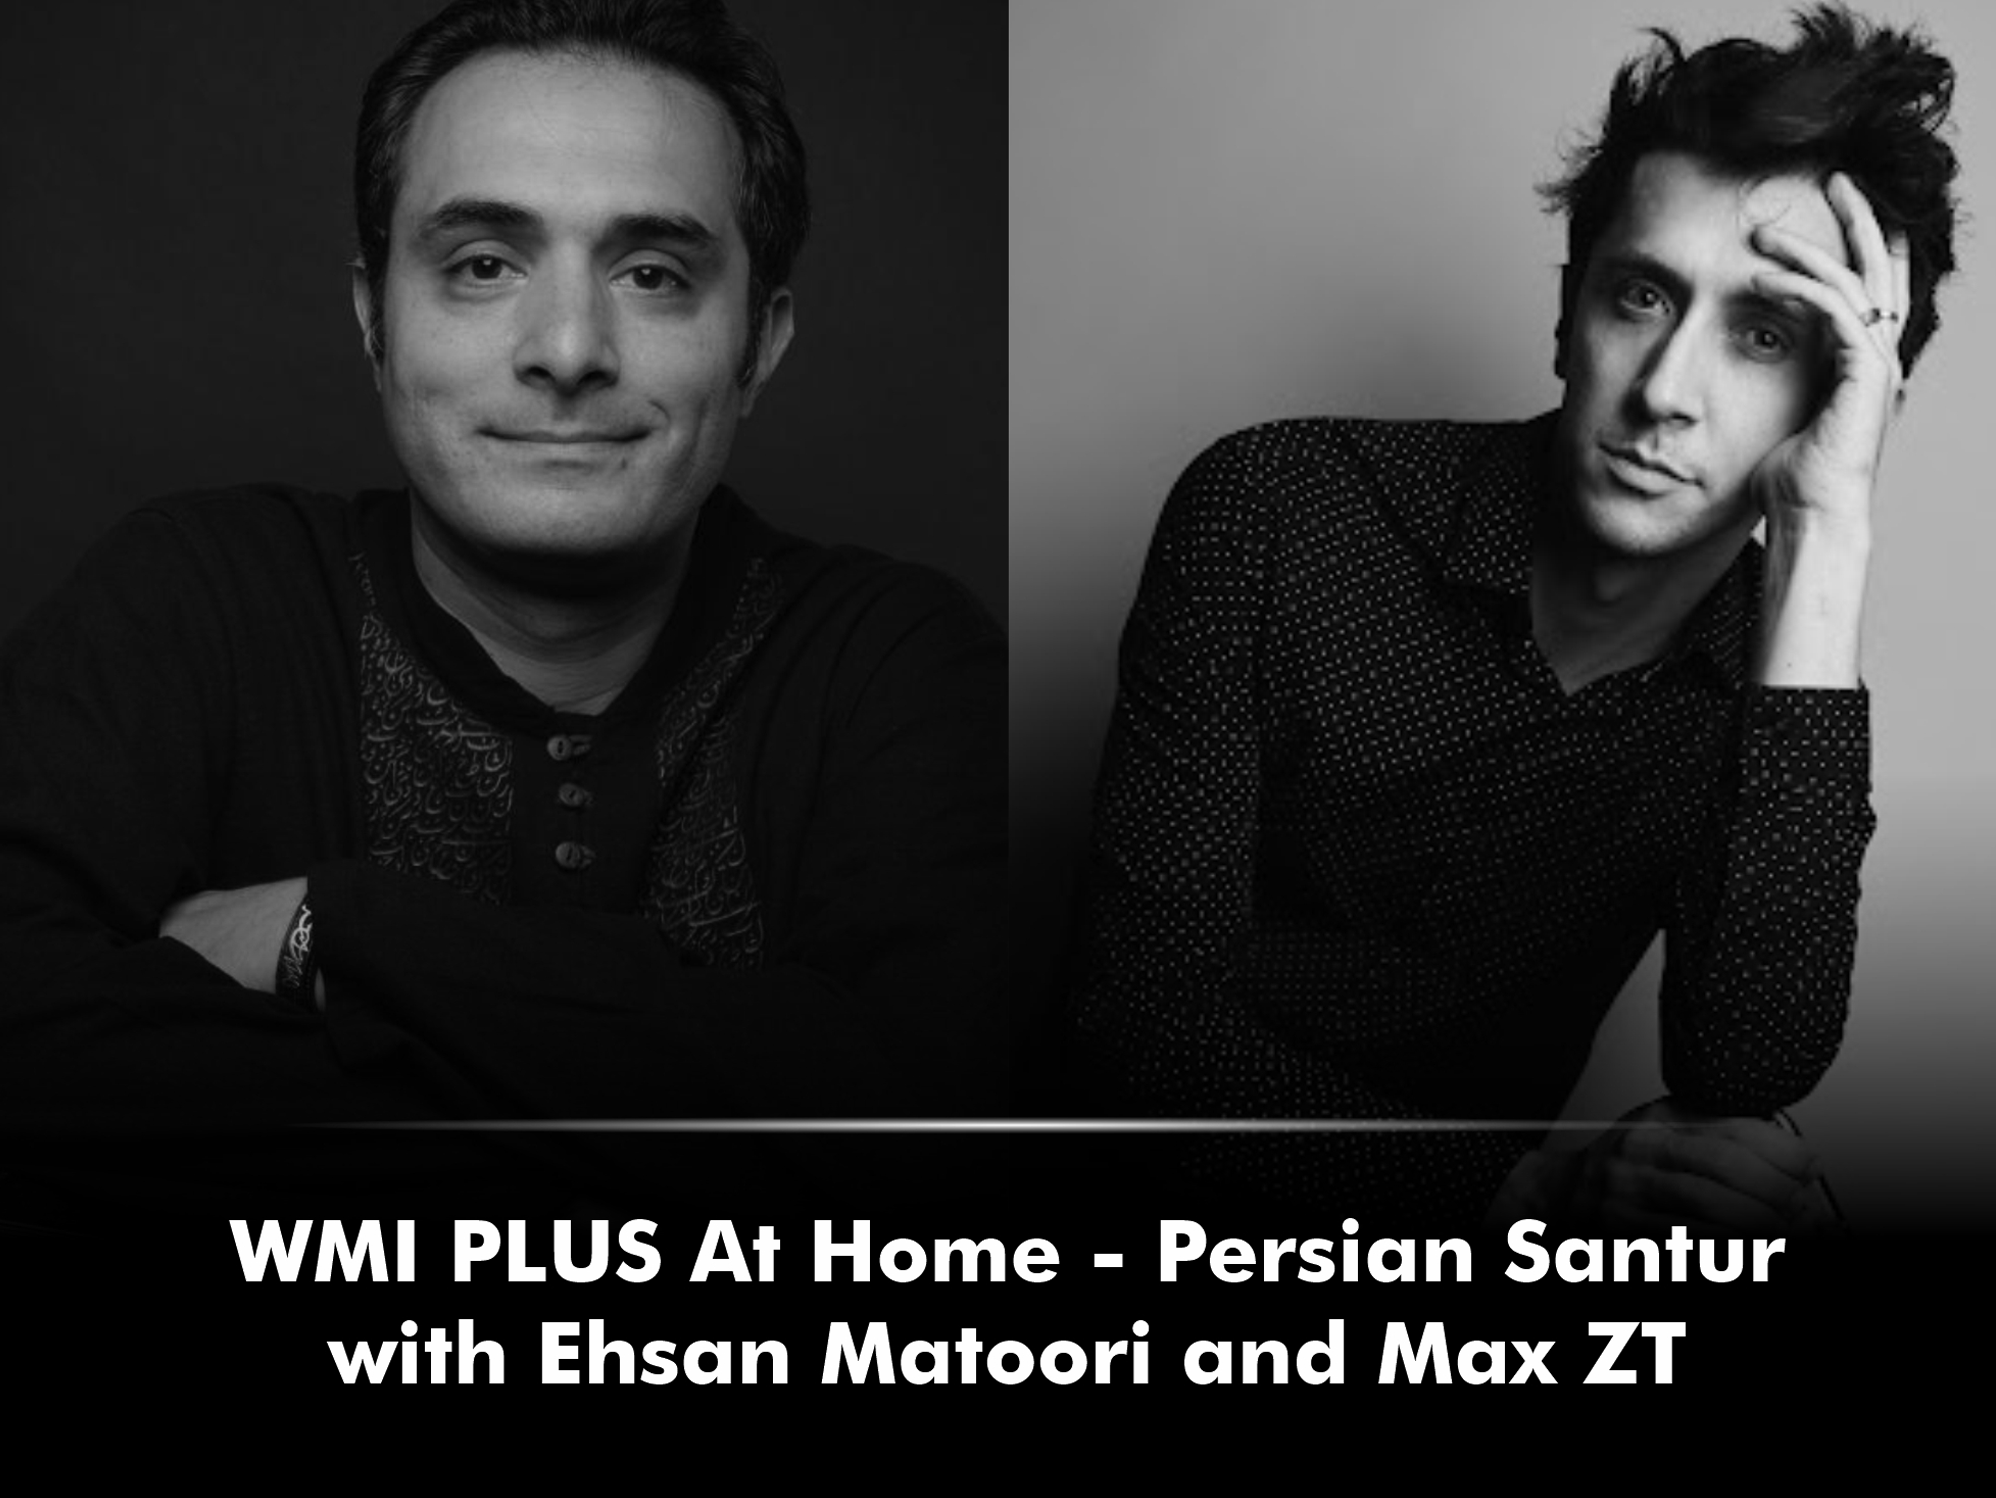 Live Conversation with Max ZT at WMI plus at home